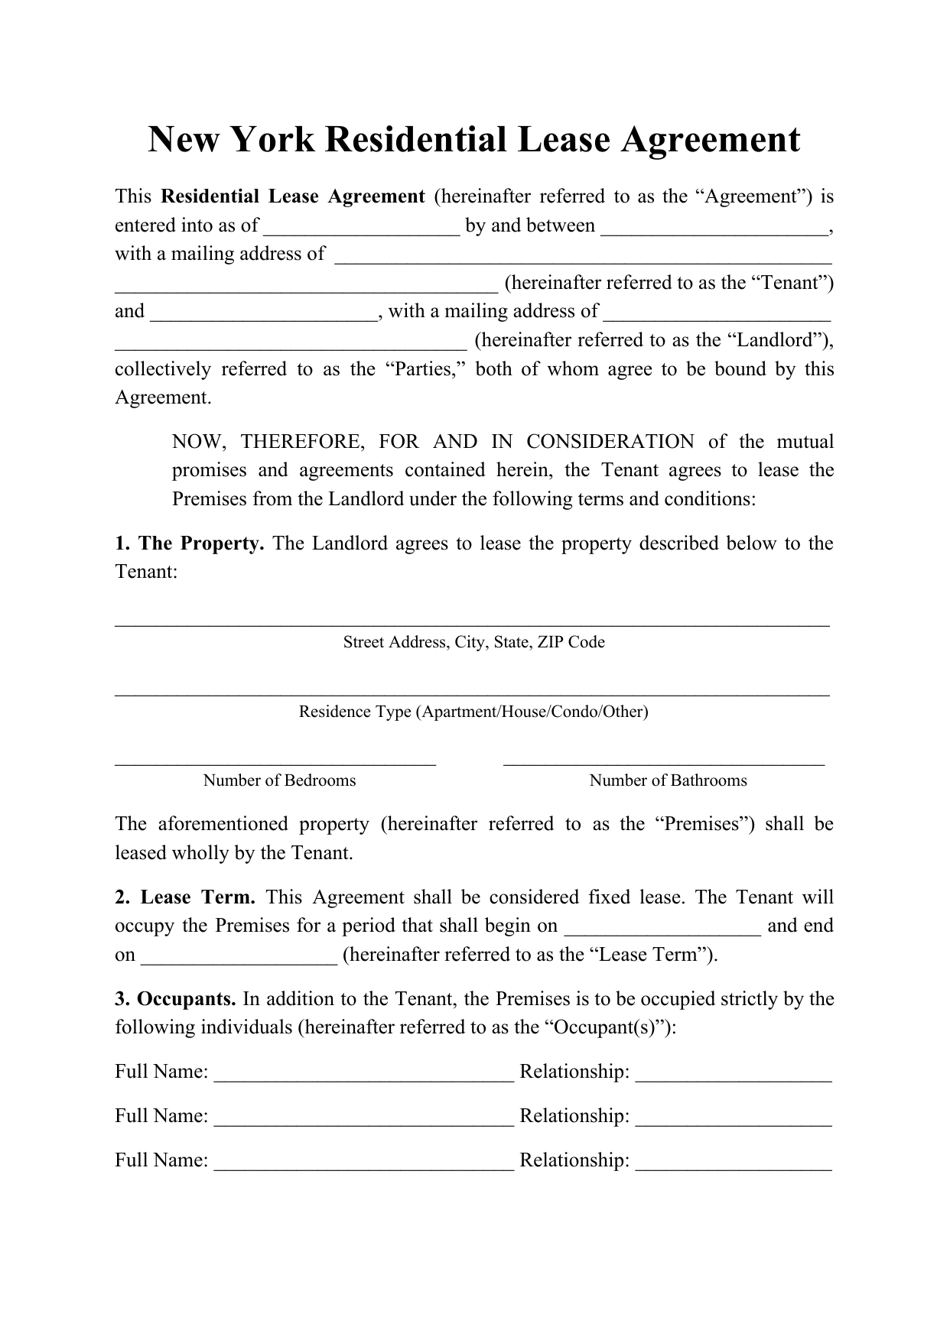 New York Residential Lease Agreement Template Fill Out Sign Online And Download PDF